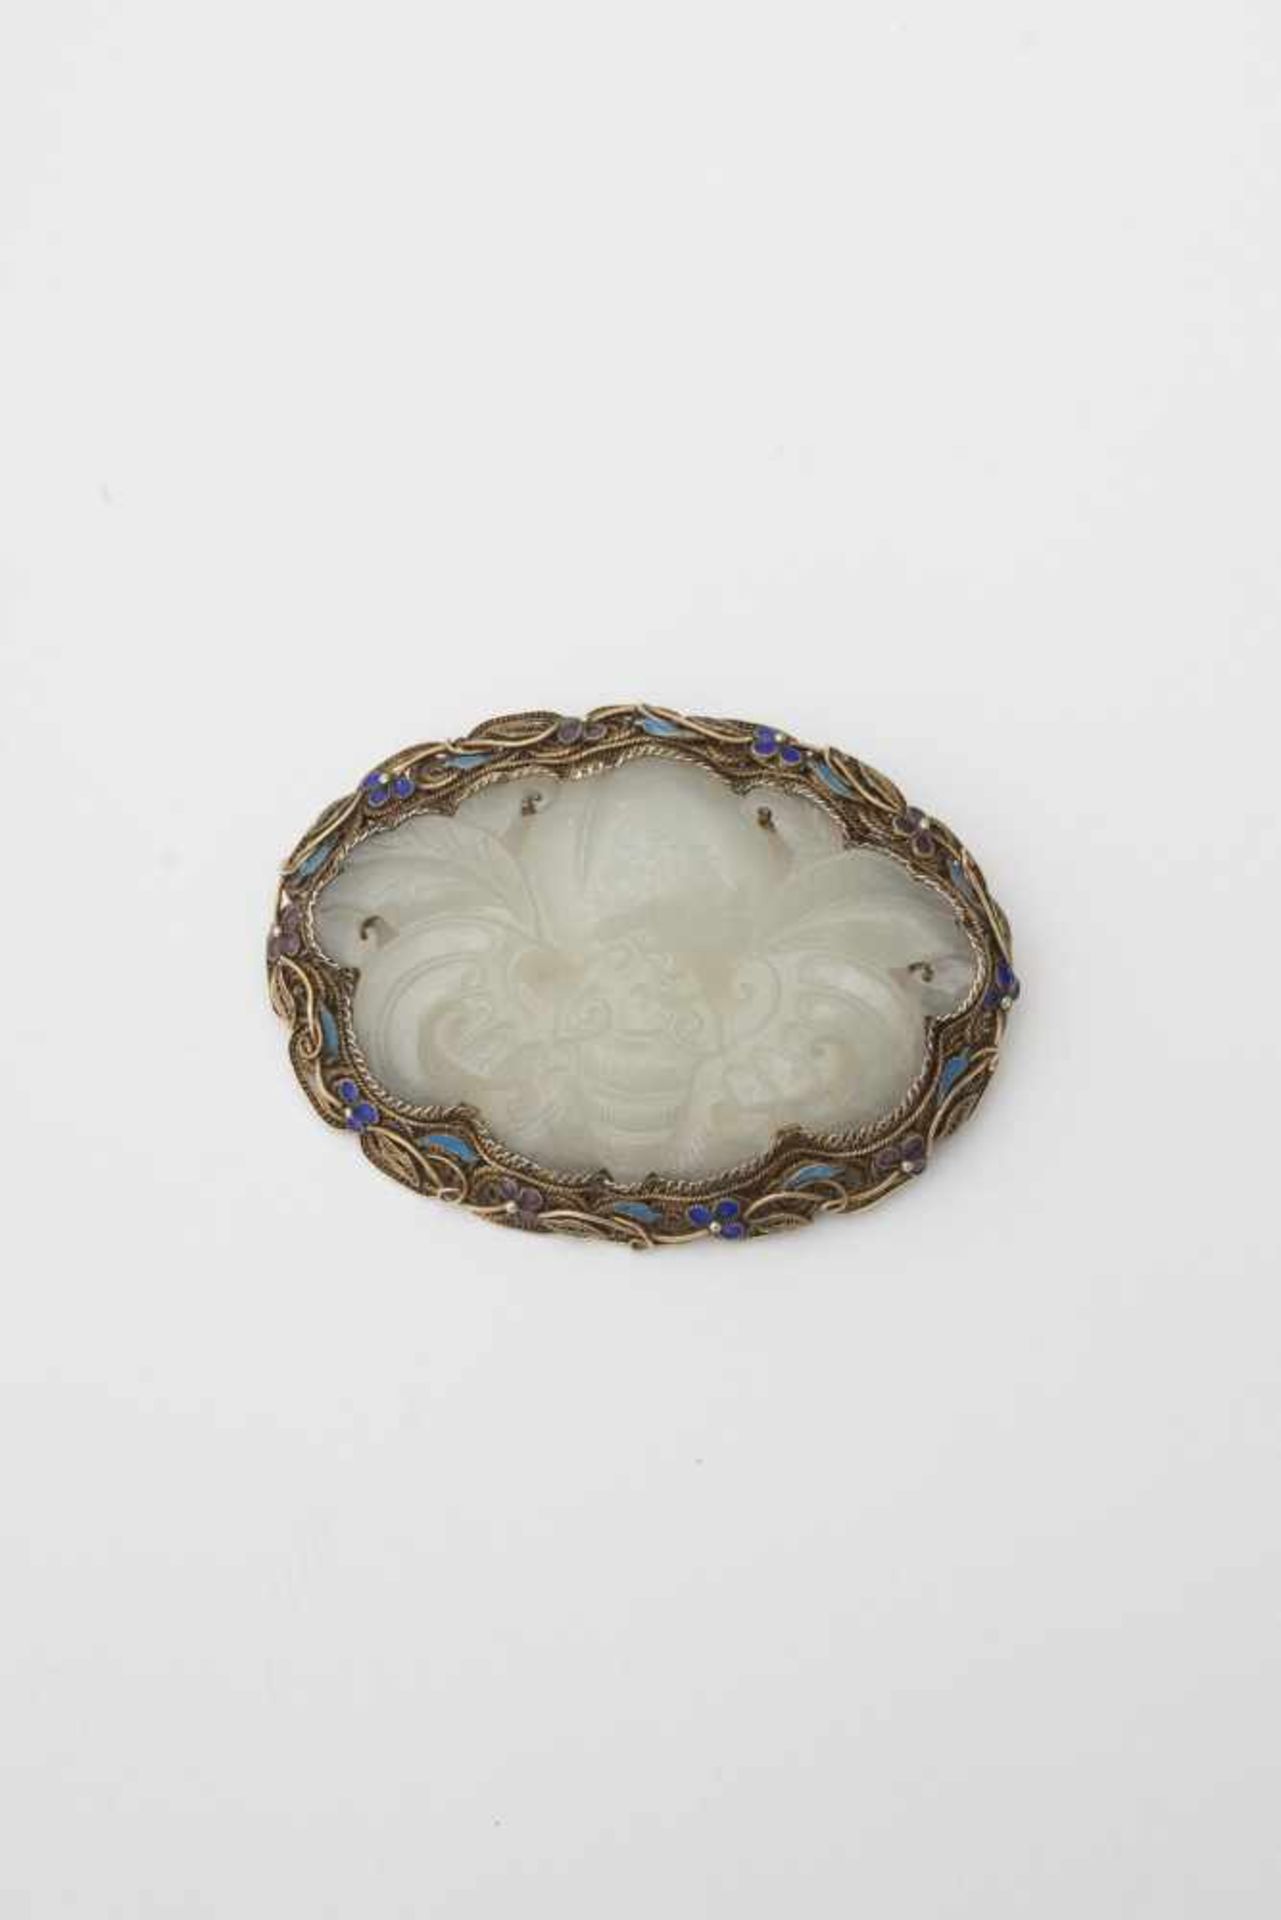 Brooch set with jade - China, early 20th century Gilded silver filigree decorated with blue and